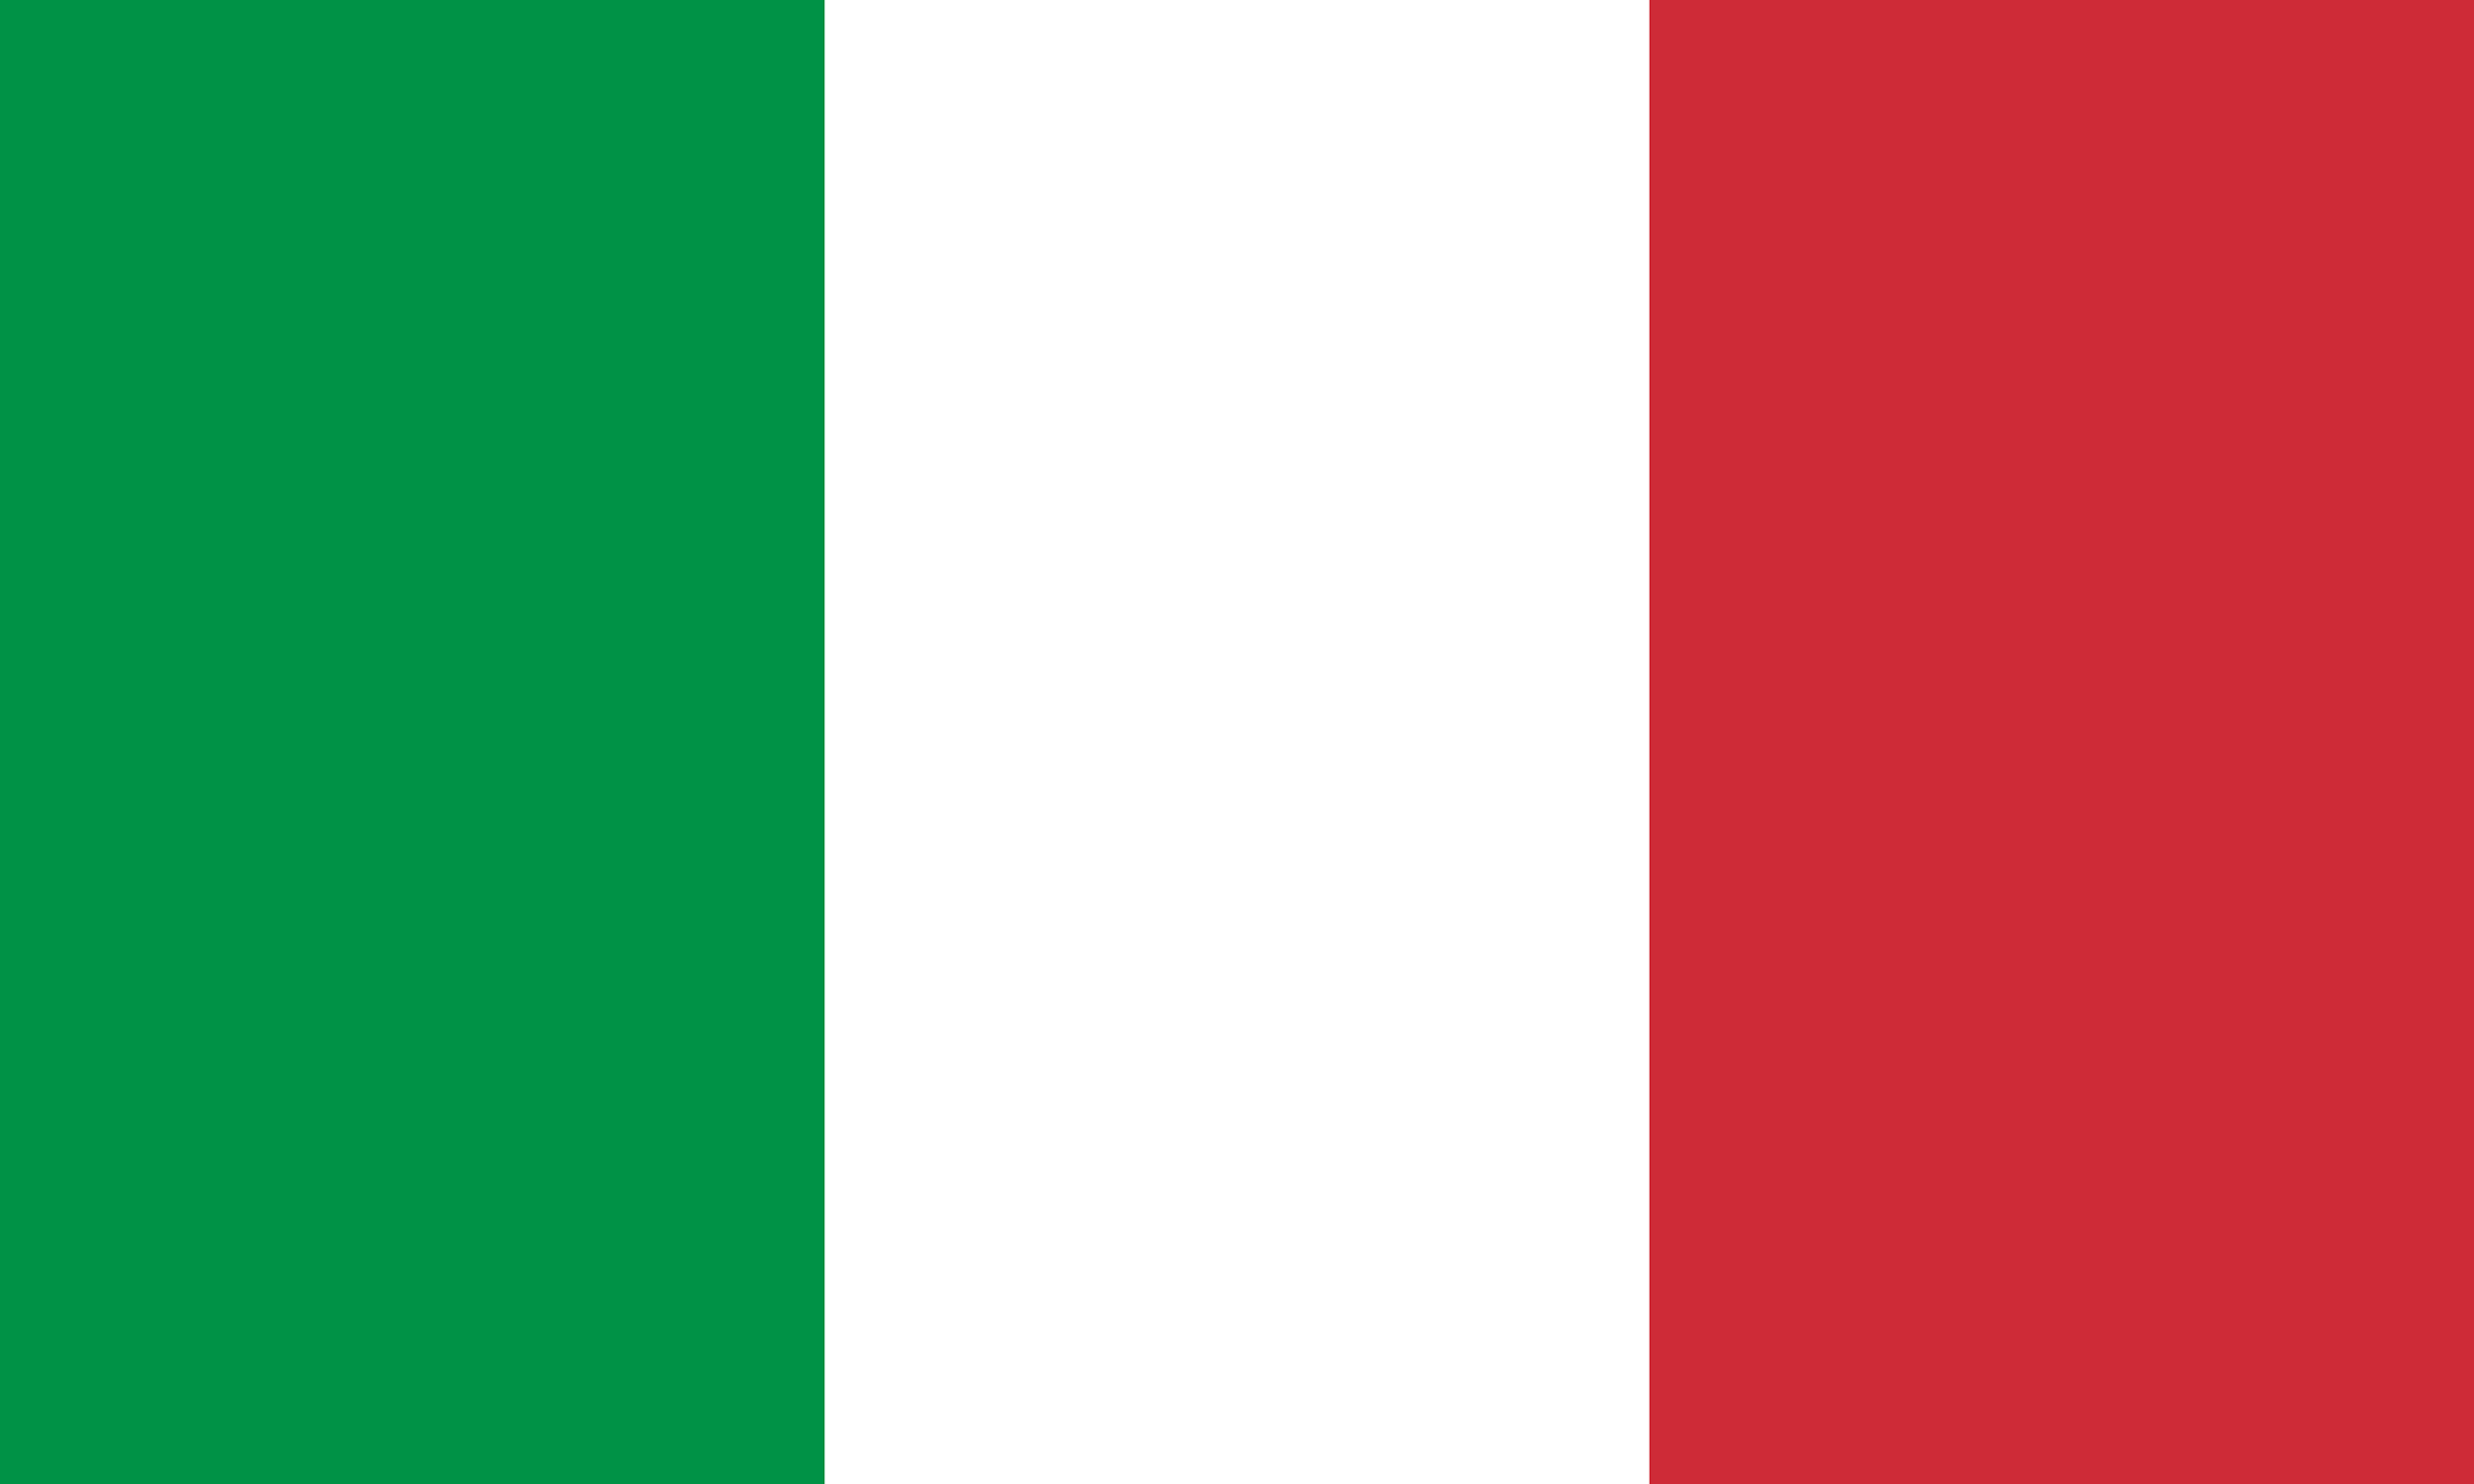 it-italy-flag.png